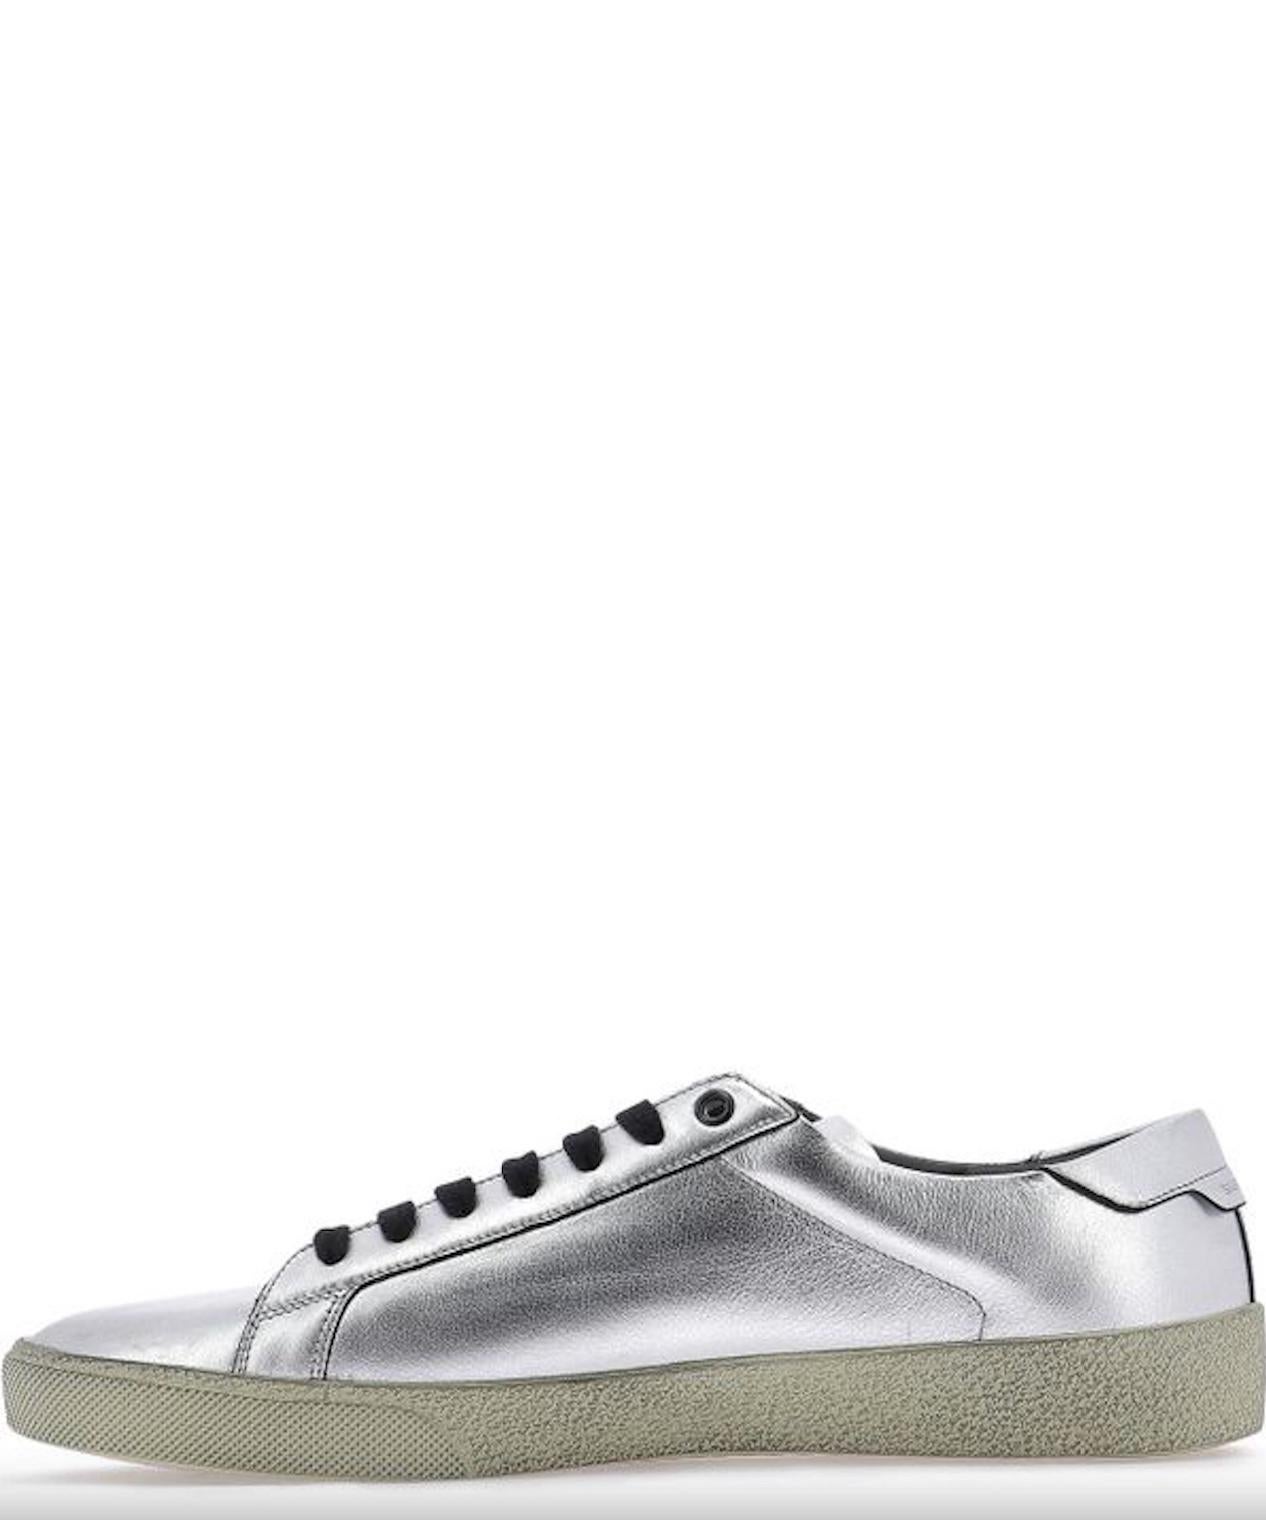 Saint Laurent Mens Metallic Silver Court Classic SL/06 Sneakers

Saint Laurent’s SL-06 sneaker comes in eye-catching silver calfskin, which, along with the aged rubber outsole, gives the brand classic retro appeal. It has gold foil branding on the